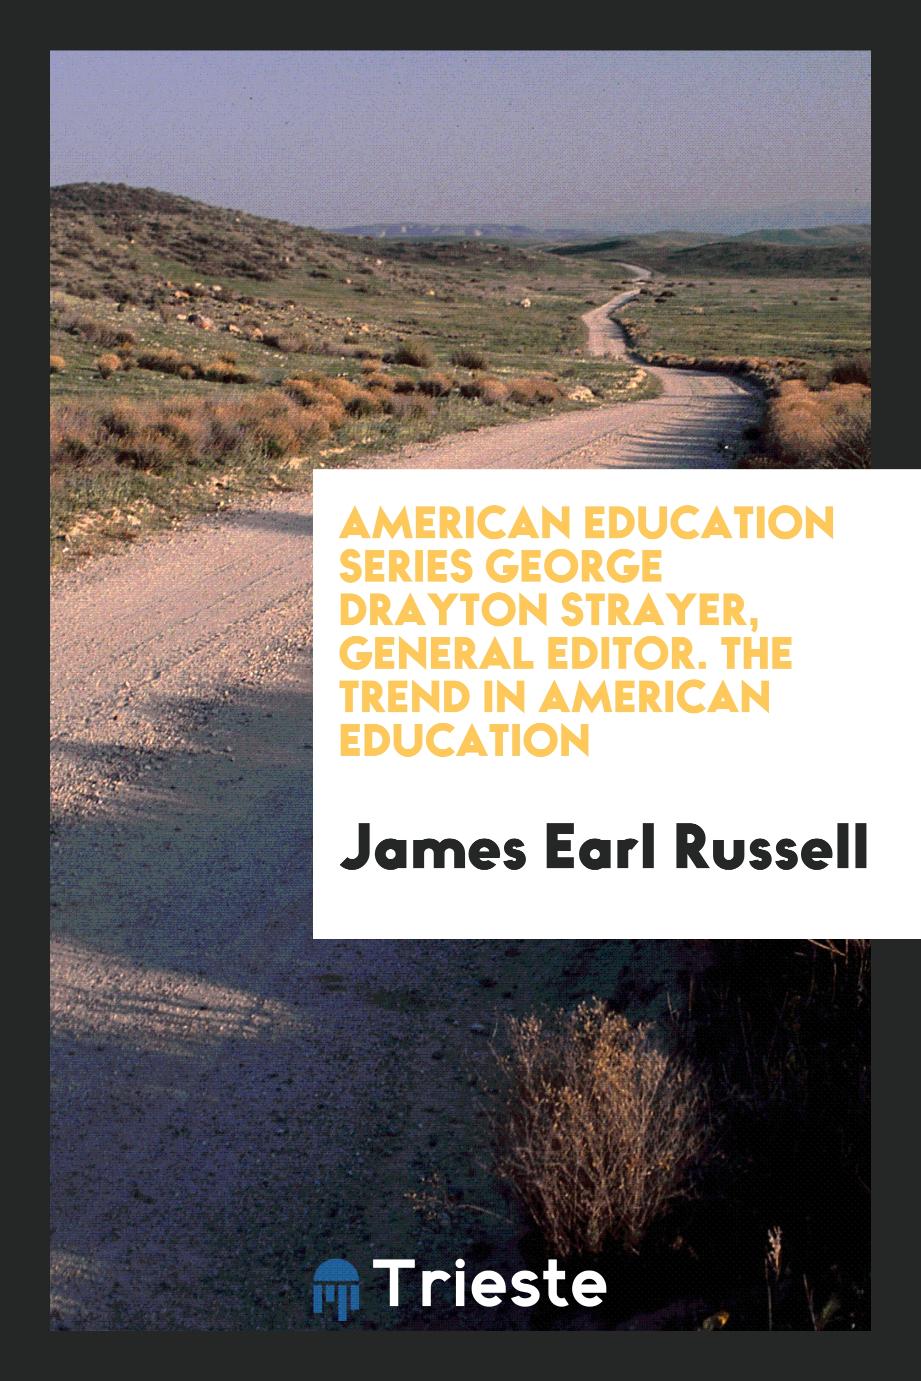 American Education Series George Drayton Strayer, General Editor. The Trend in American Education